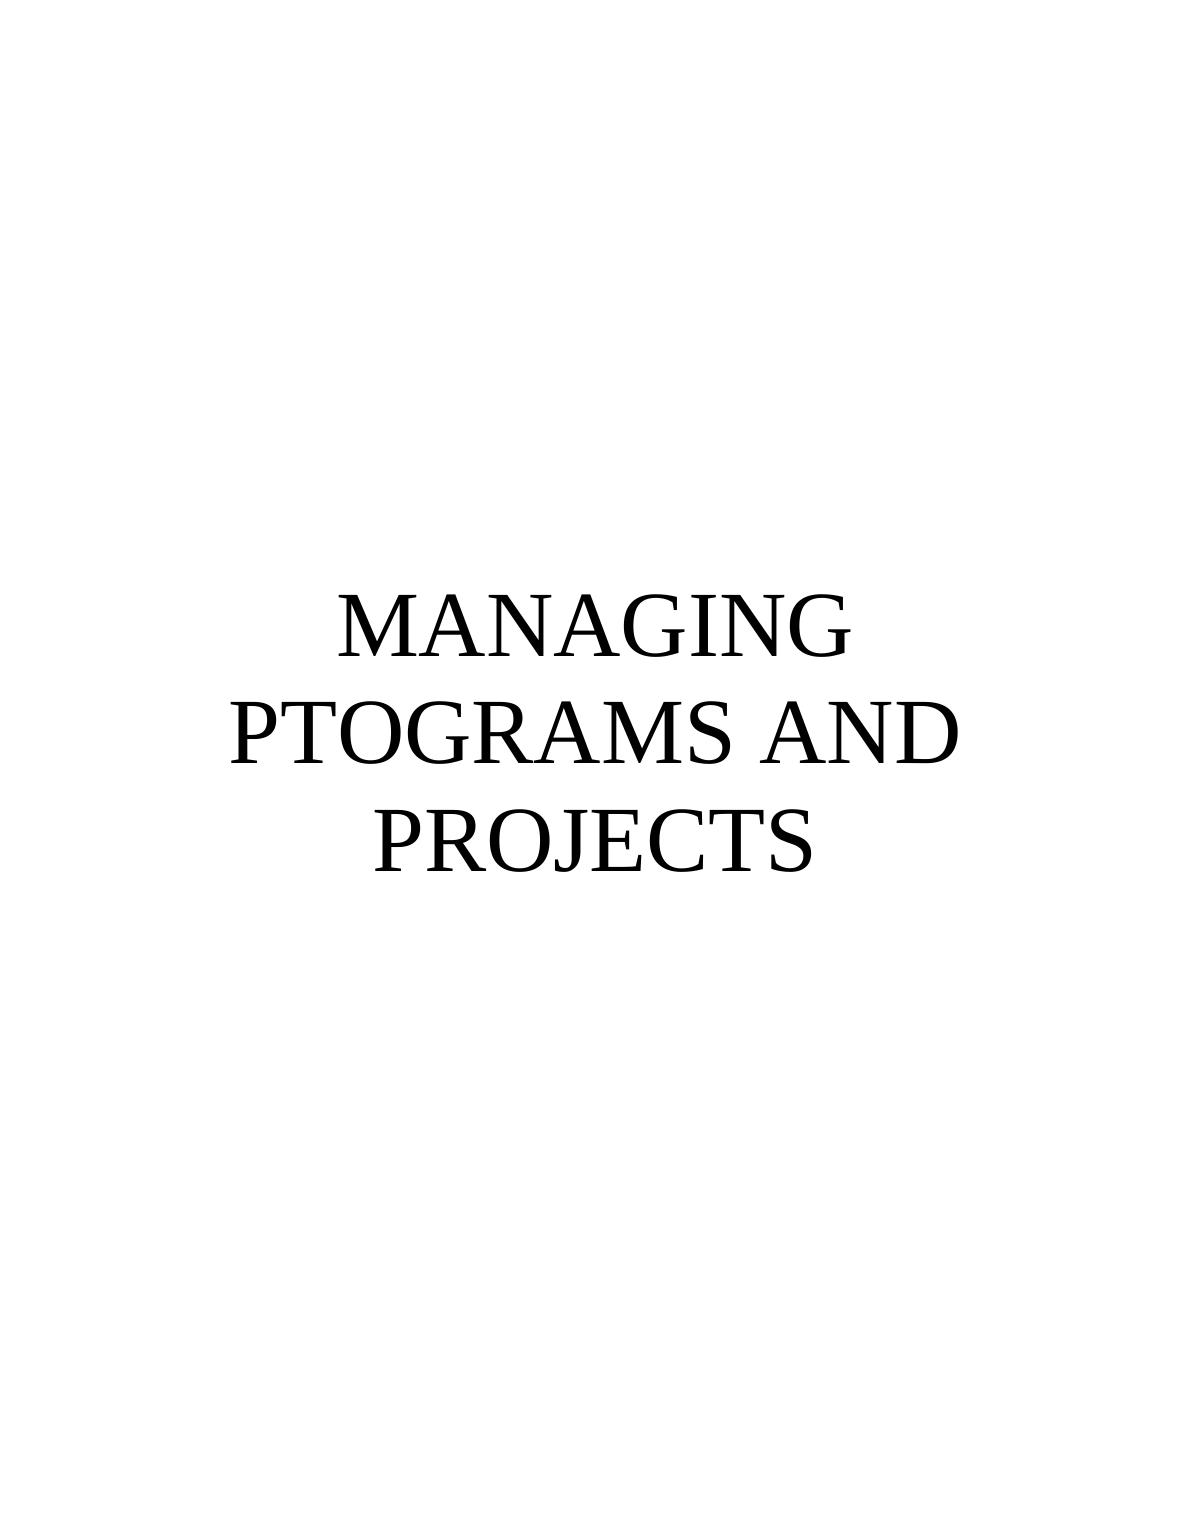 Managing Programs and Projects_1